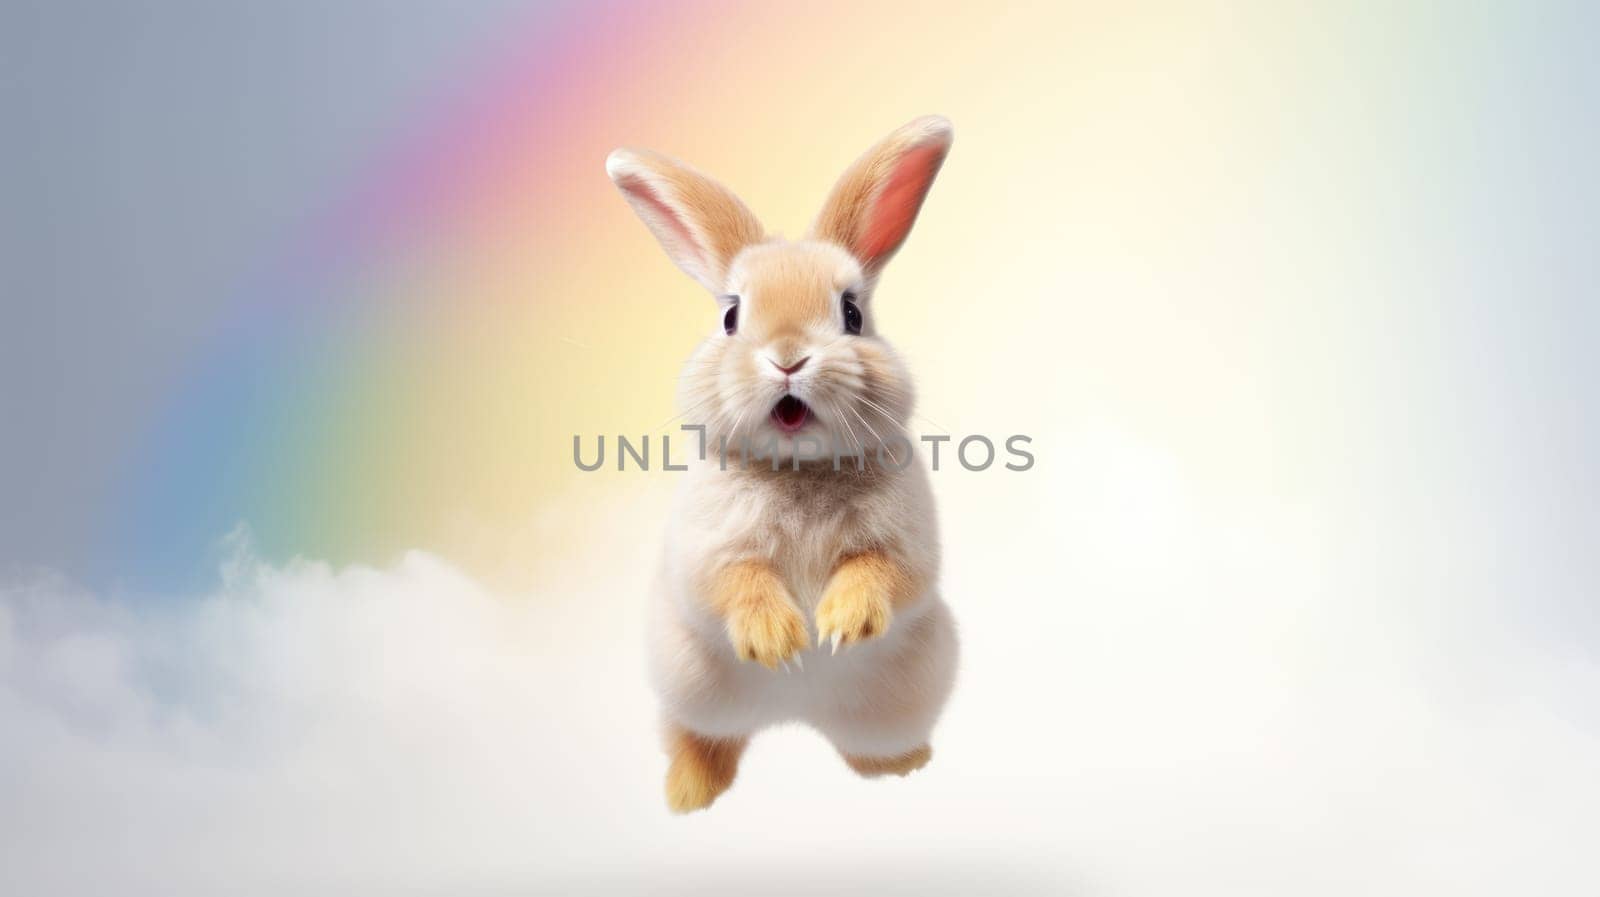 Adorable bunny happily hopping on white clouds under a vibrant rainbow by JuliaDorian